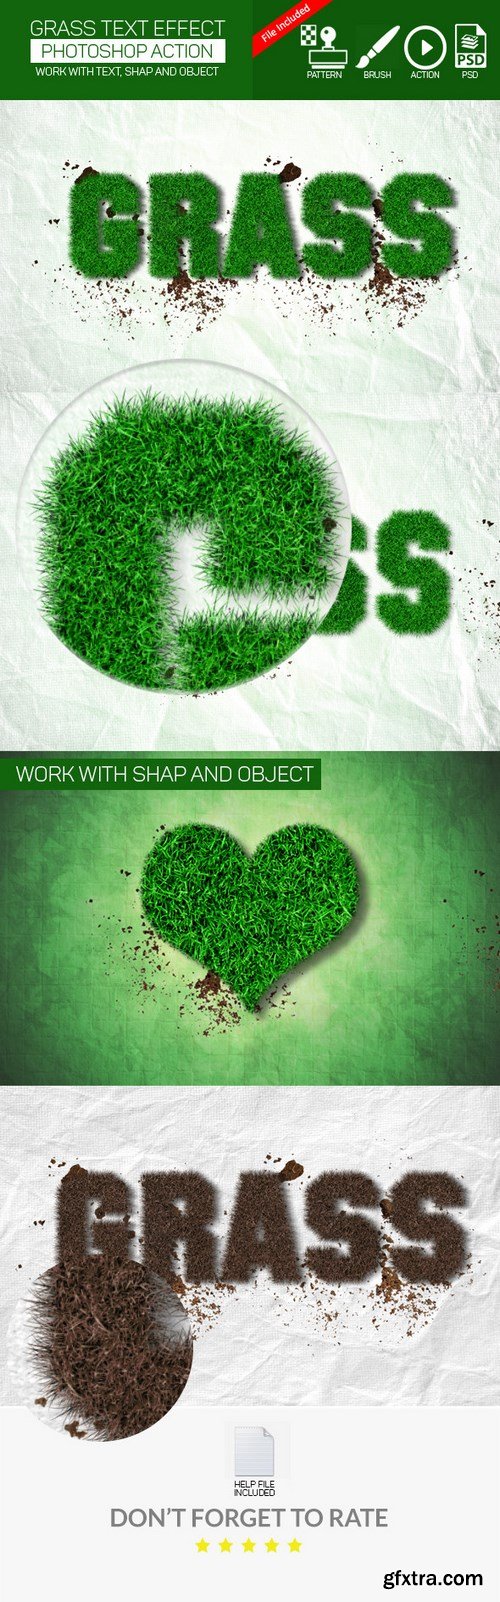 Graphicriver - Realistic Grass Effect Action 17067440